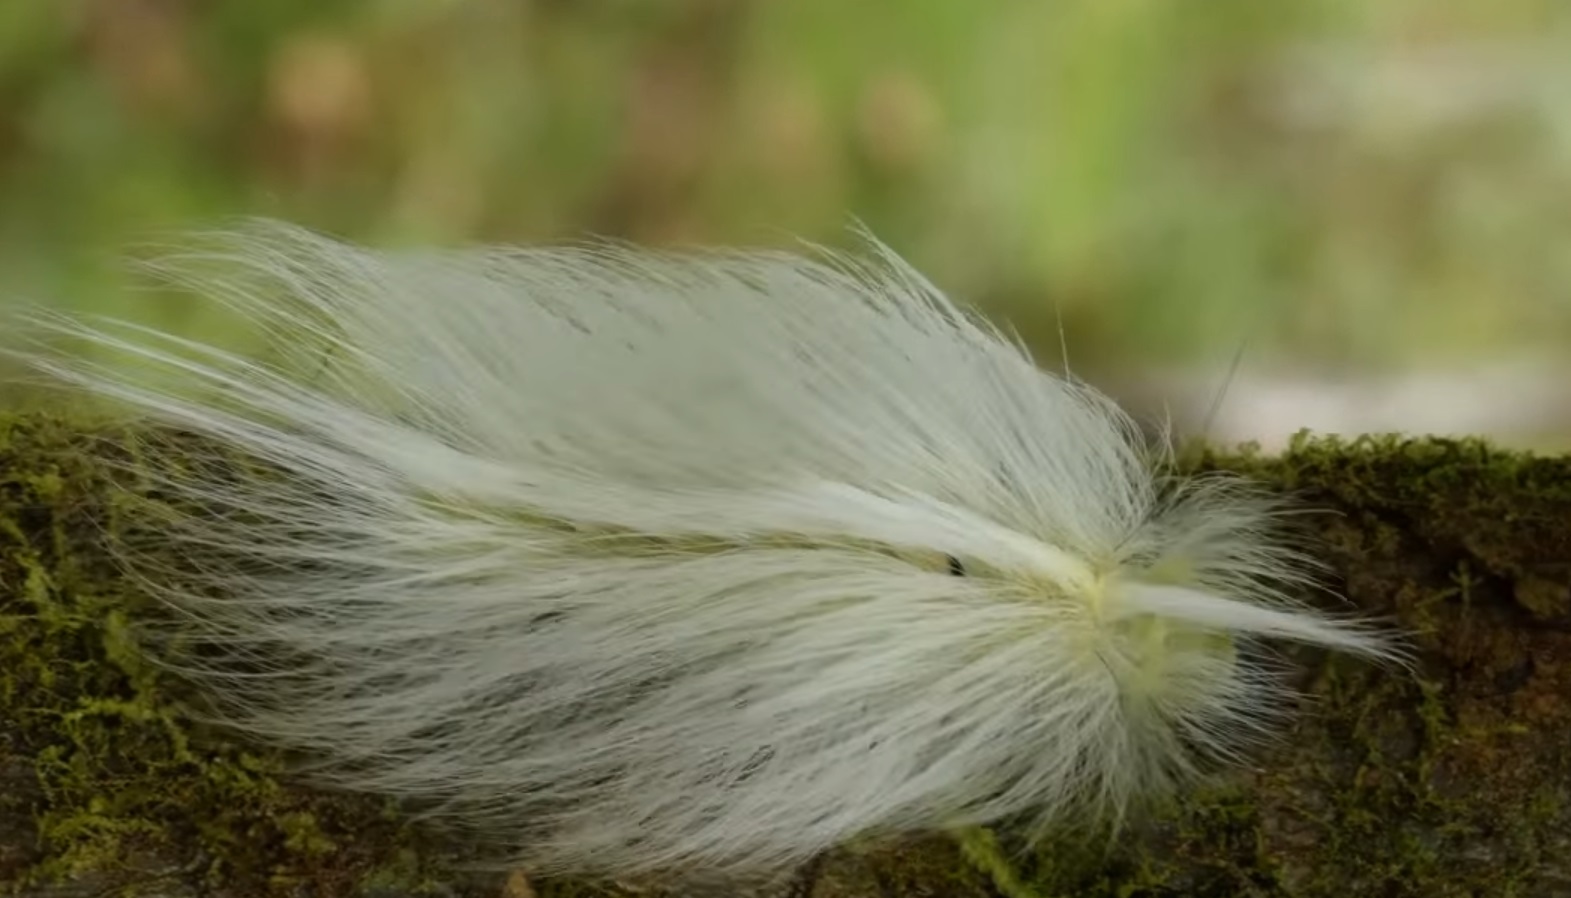 Caterpillar Disguised As Feather